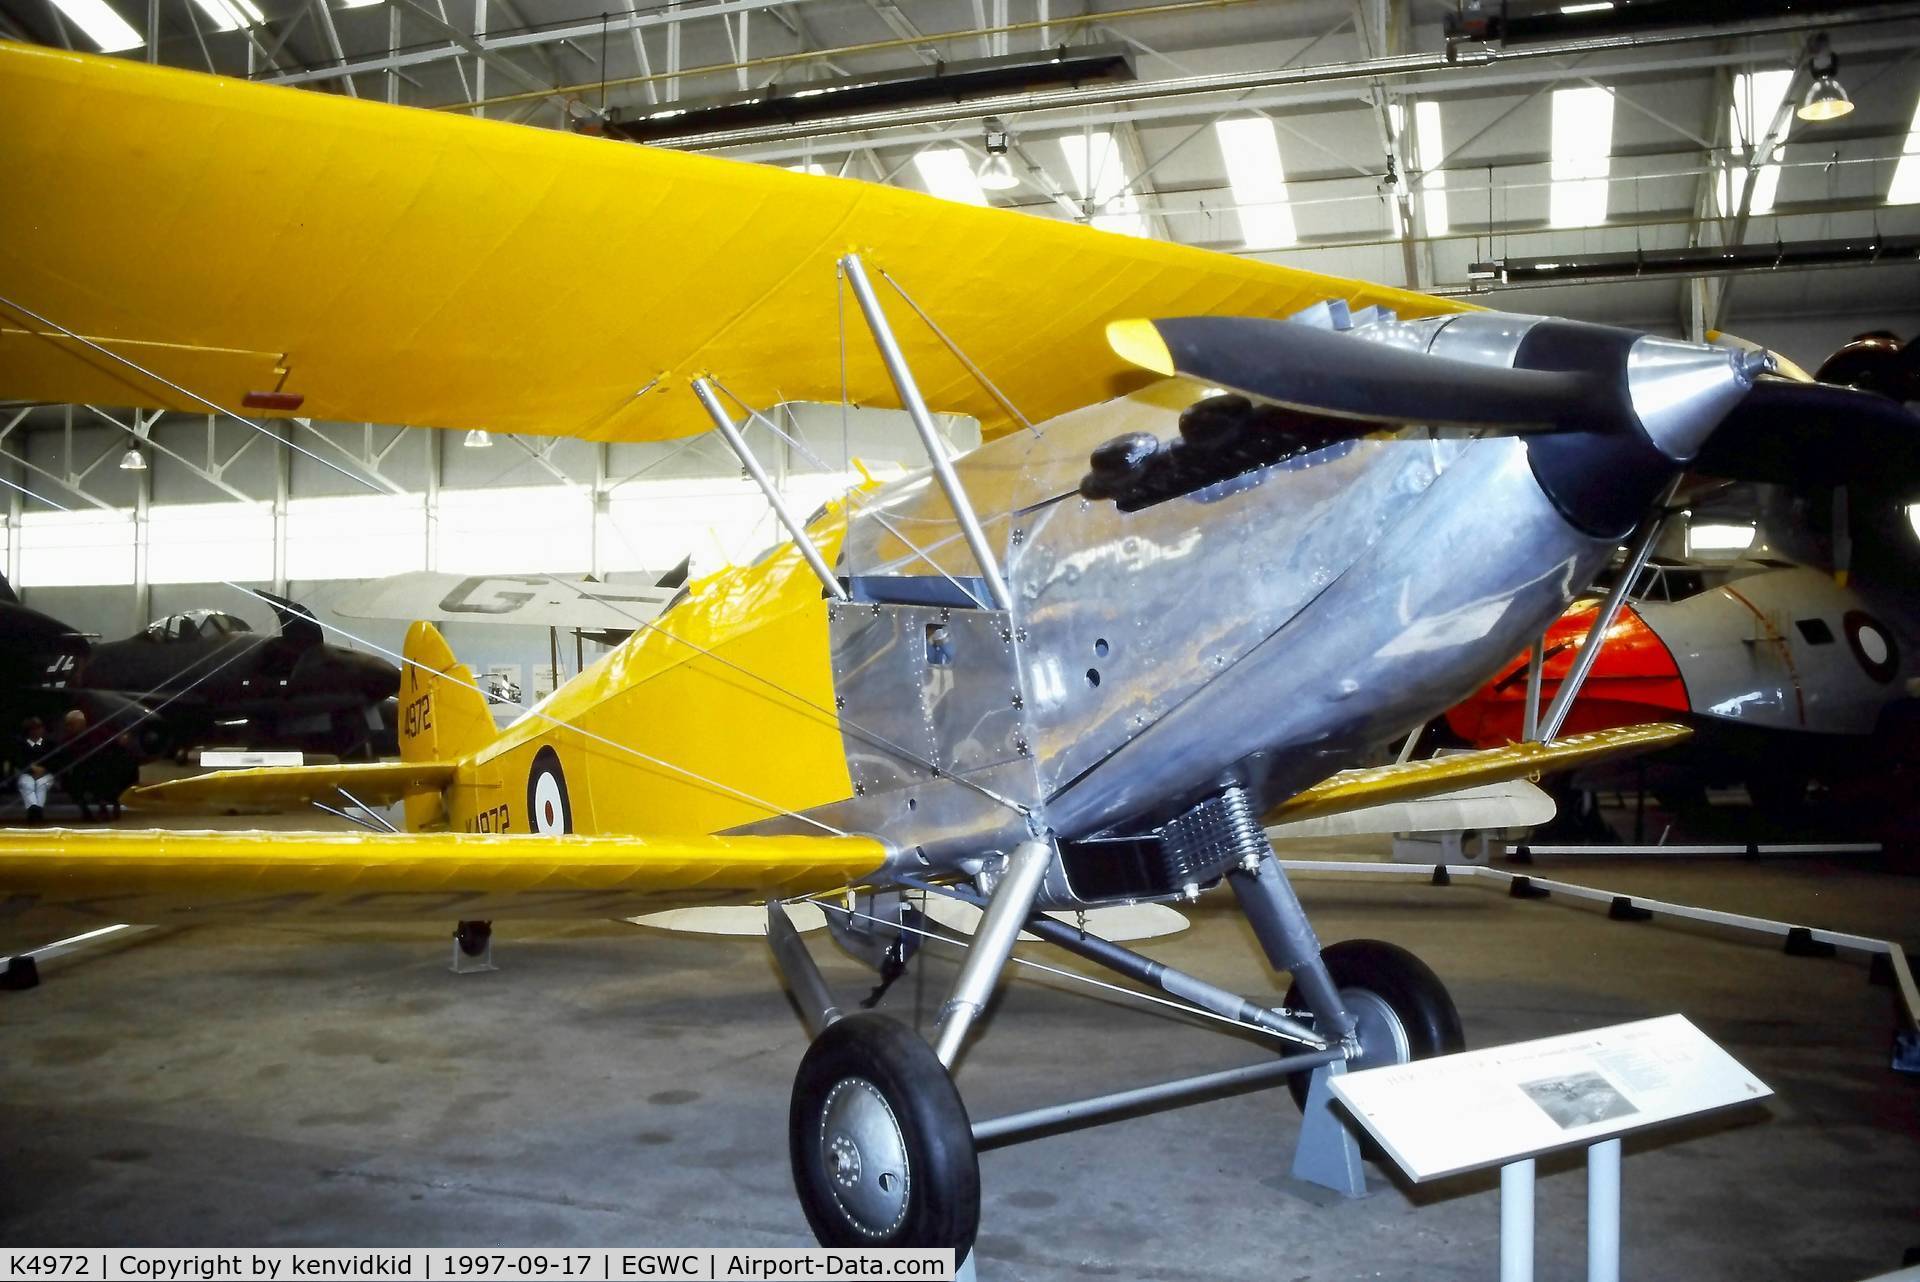 K4972, 1935 Hawker Hart Trainer II C/N 4261, A visit to Cosford in 1997.